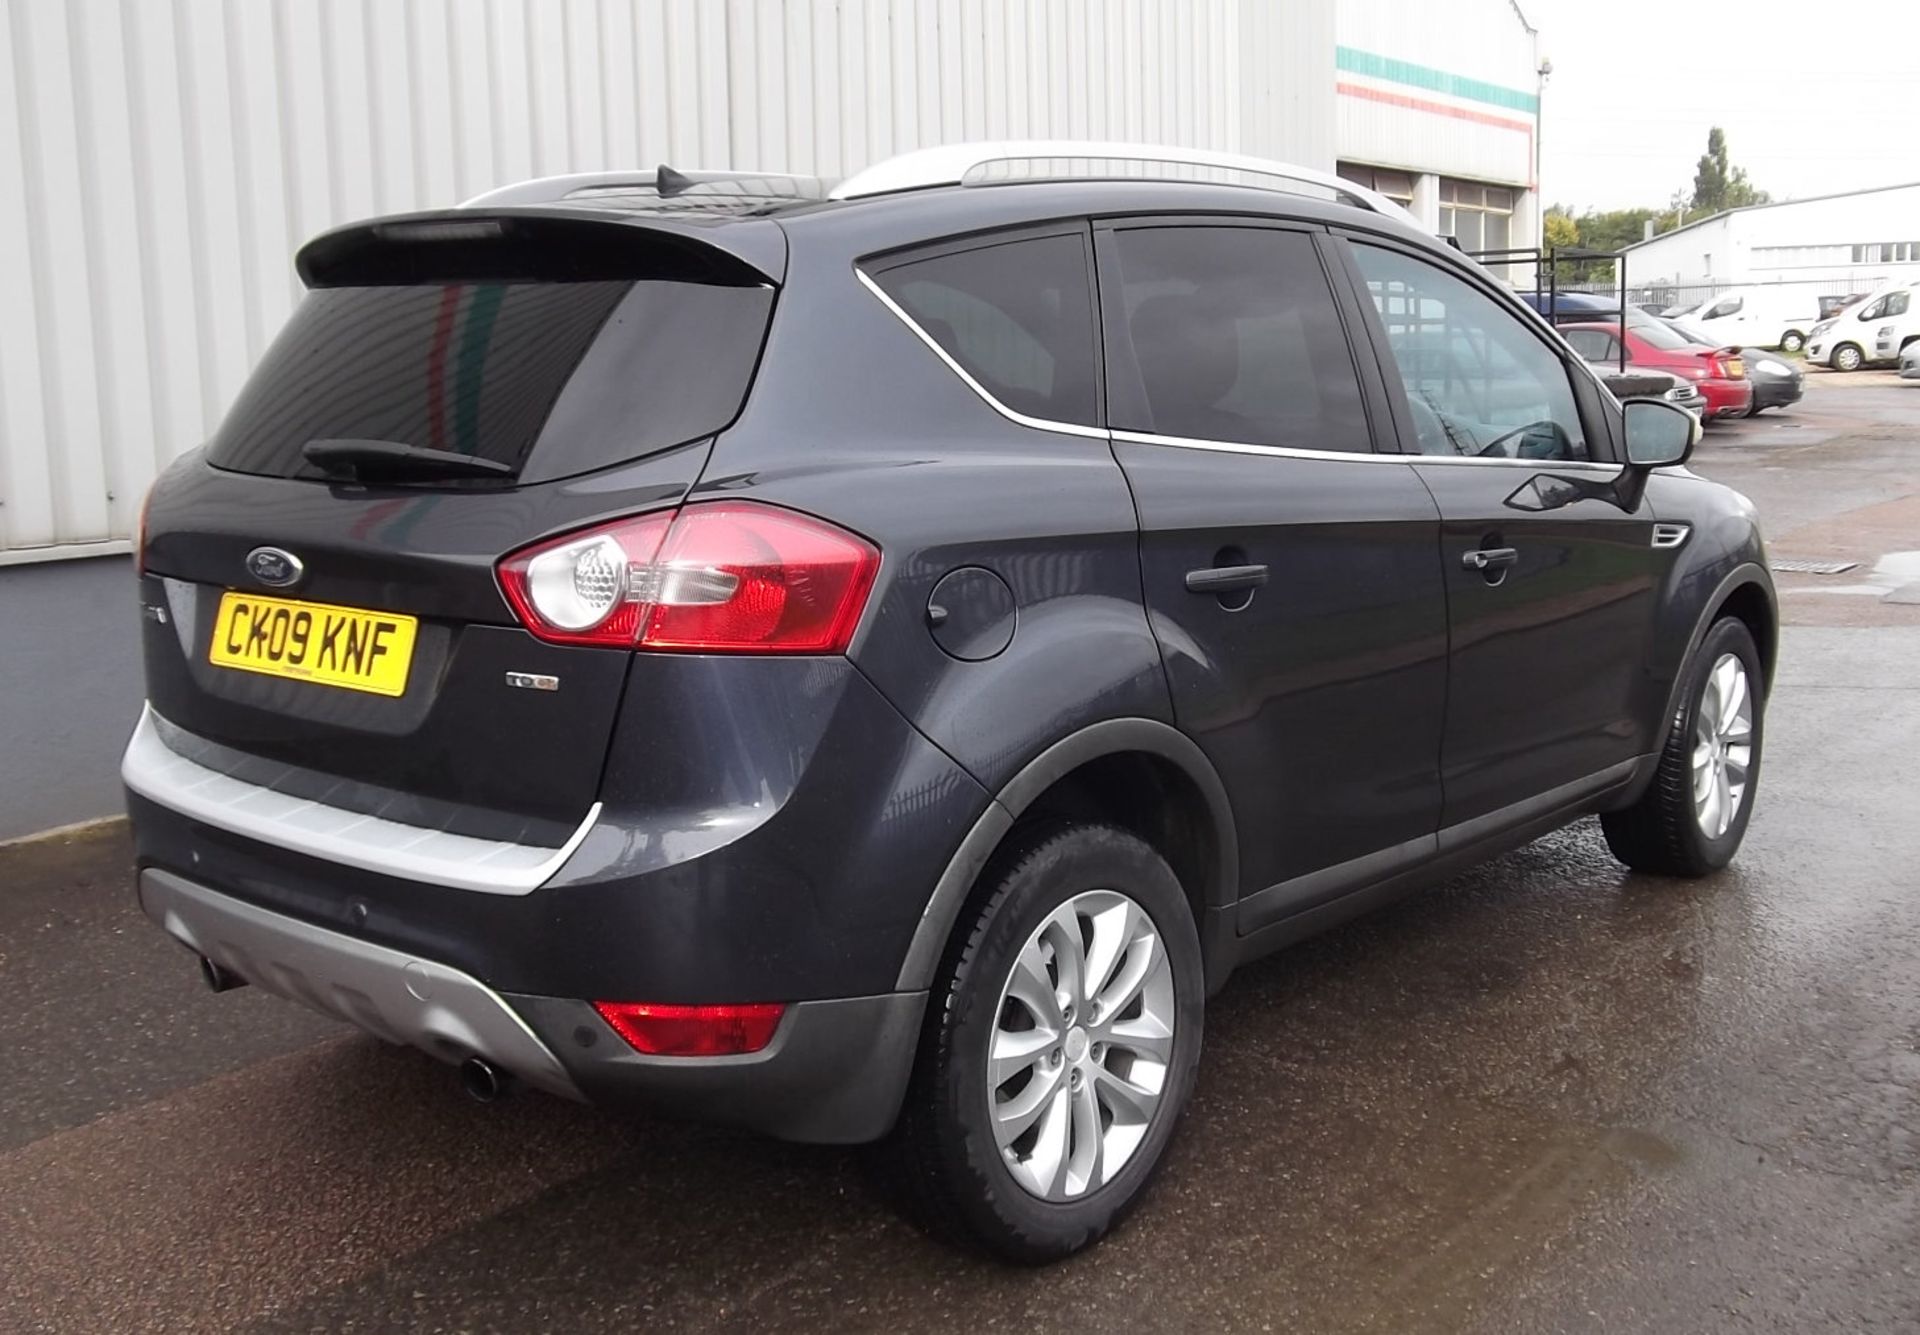 2009 Ford Kuga 2.0 Tdci Titanium 5 Dr 4x4 - CL505 - NO VAT ON THE HAMMER - Location: Corby, Northamp - Image 8 of 12